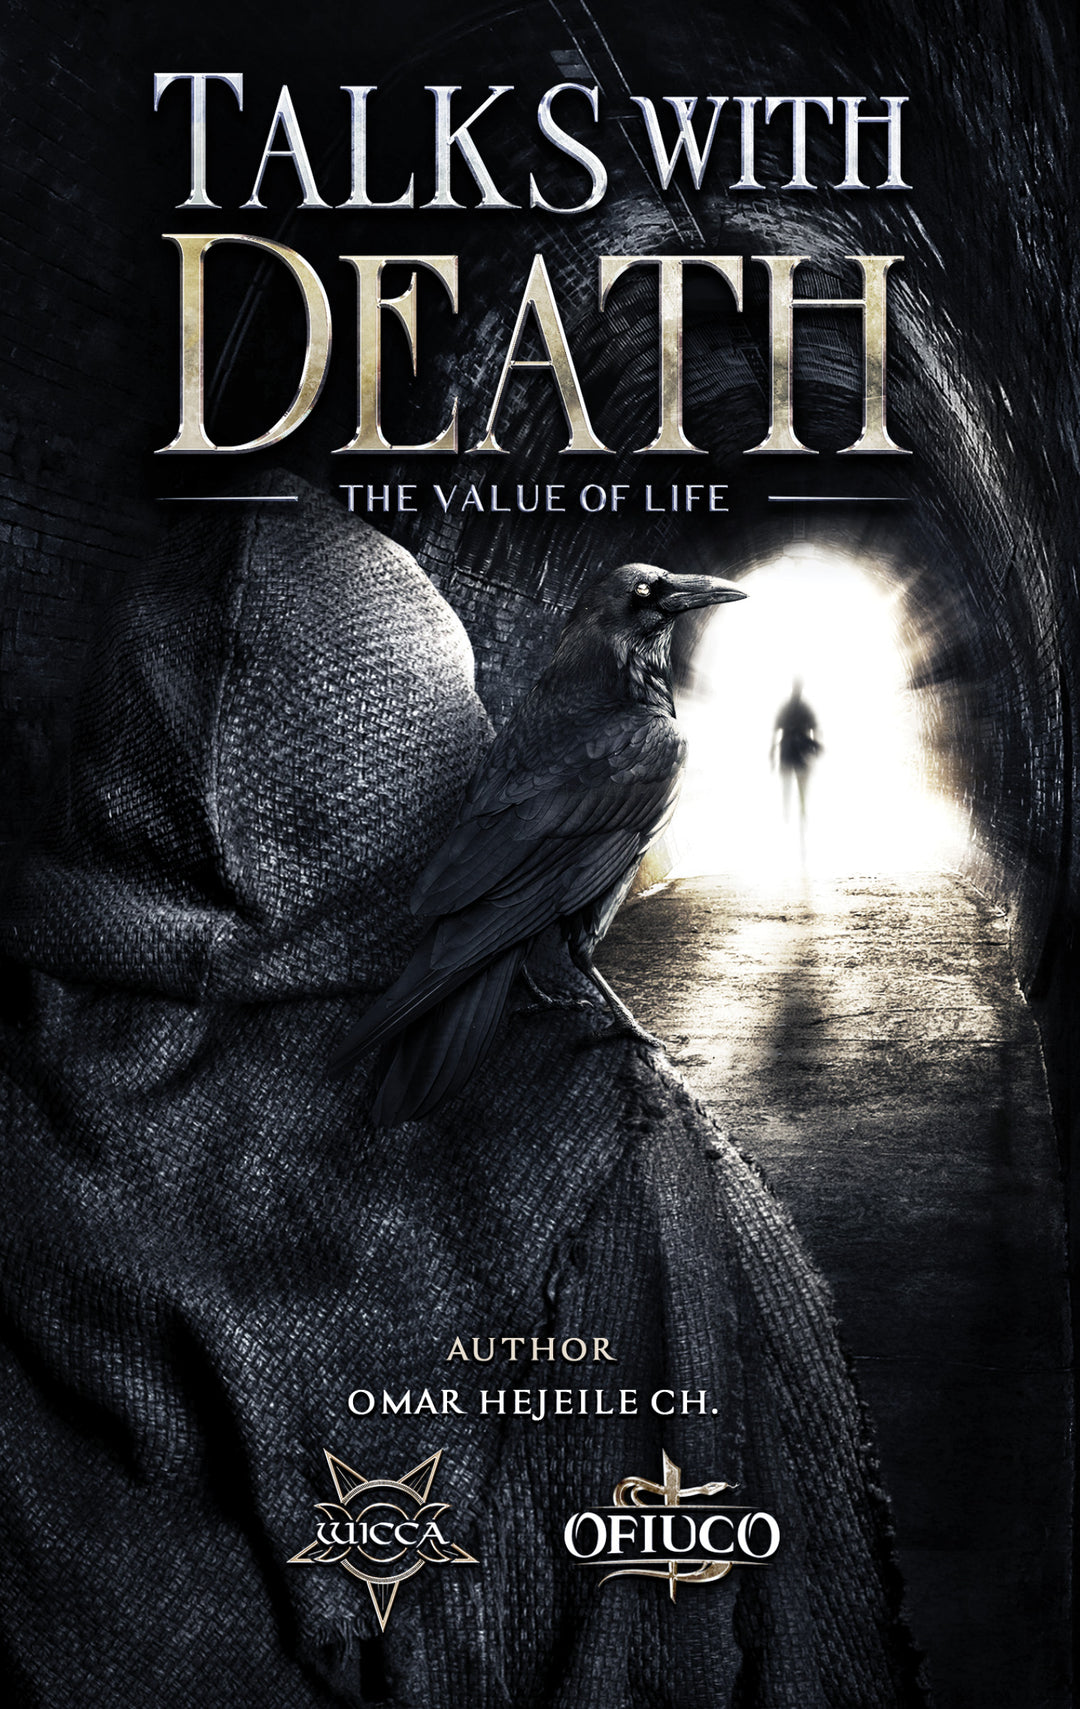 Book Talks with Death: The Value of Life